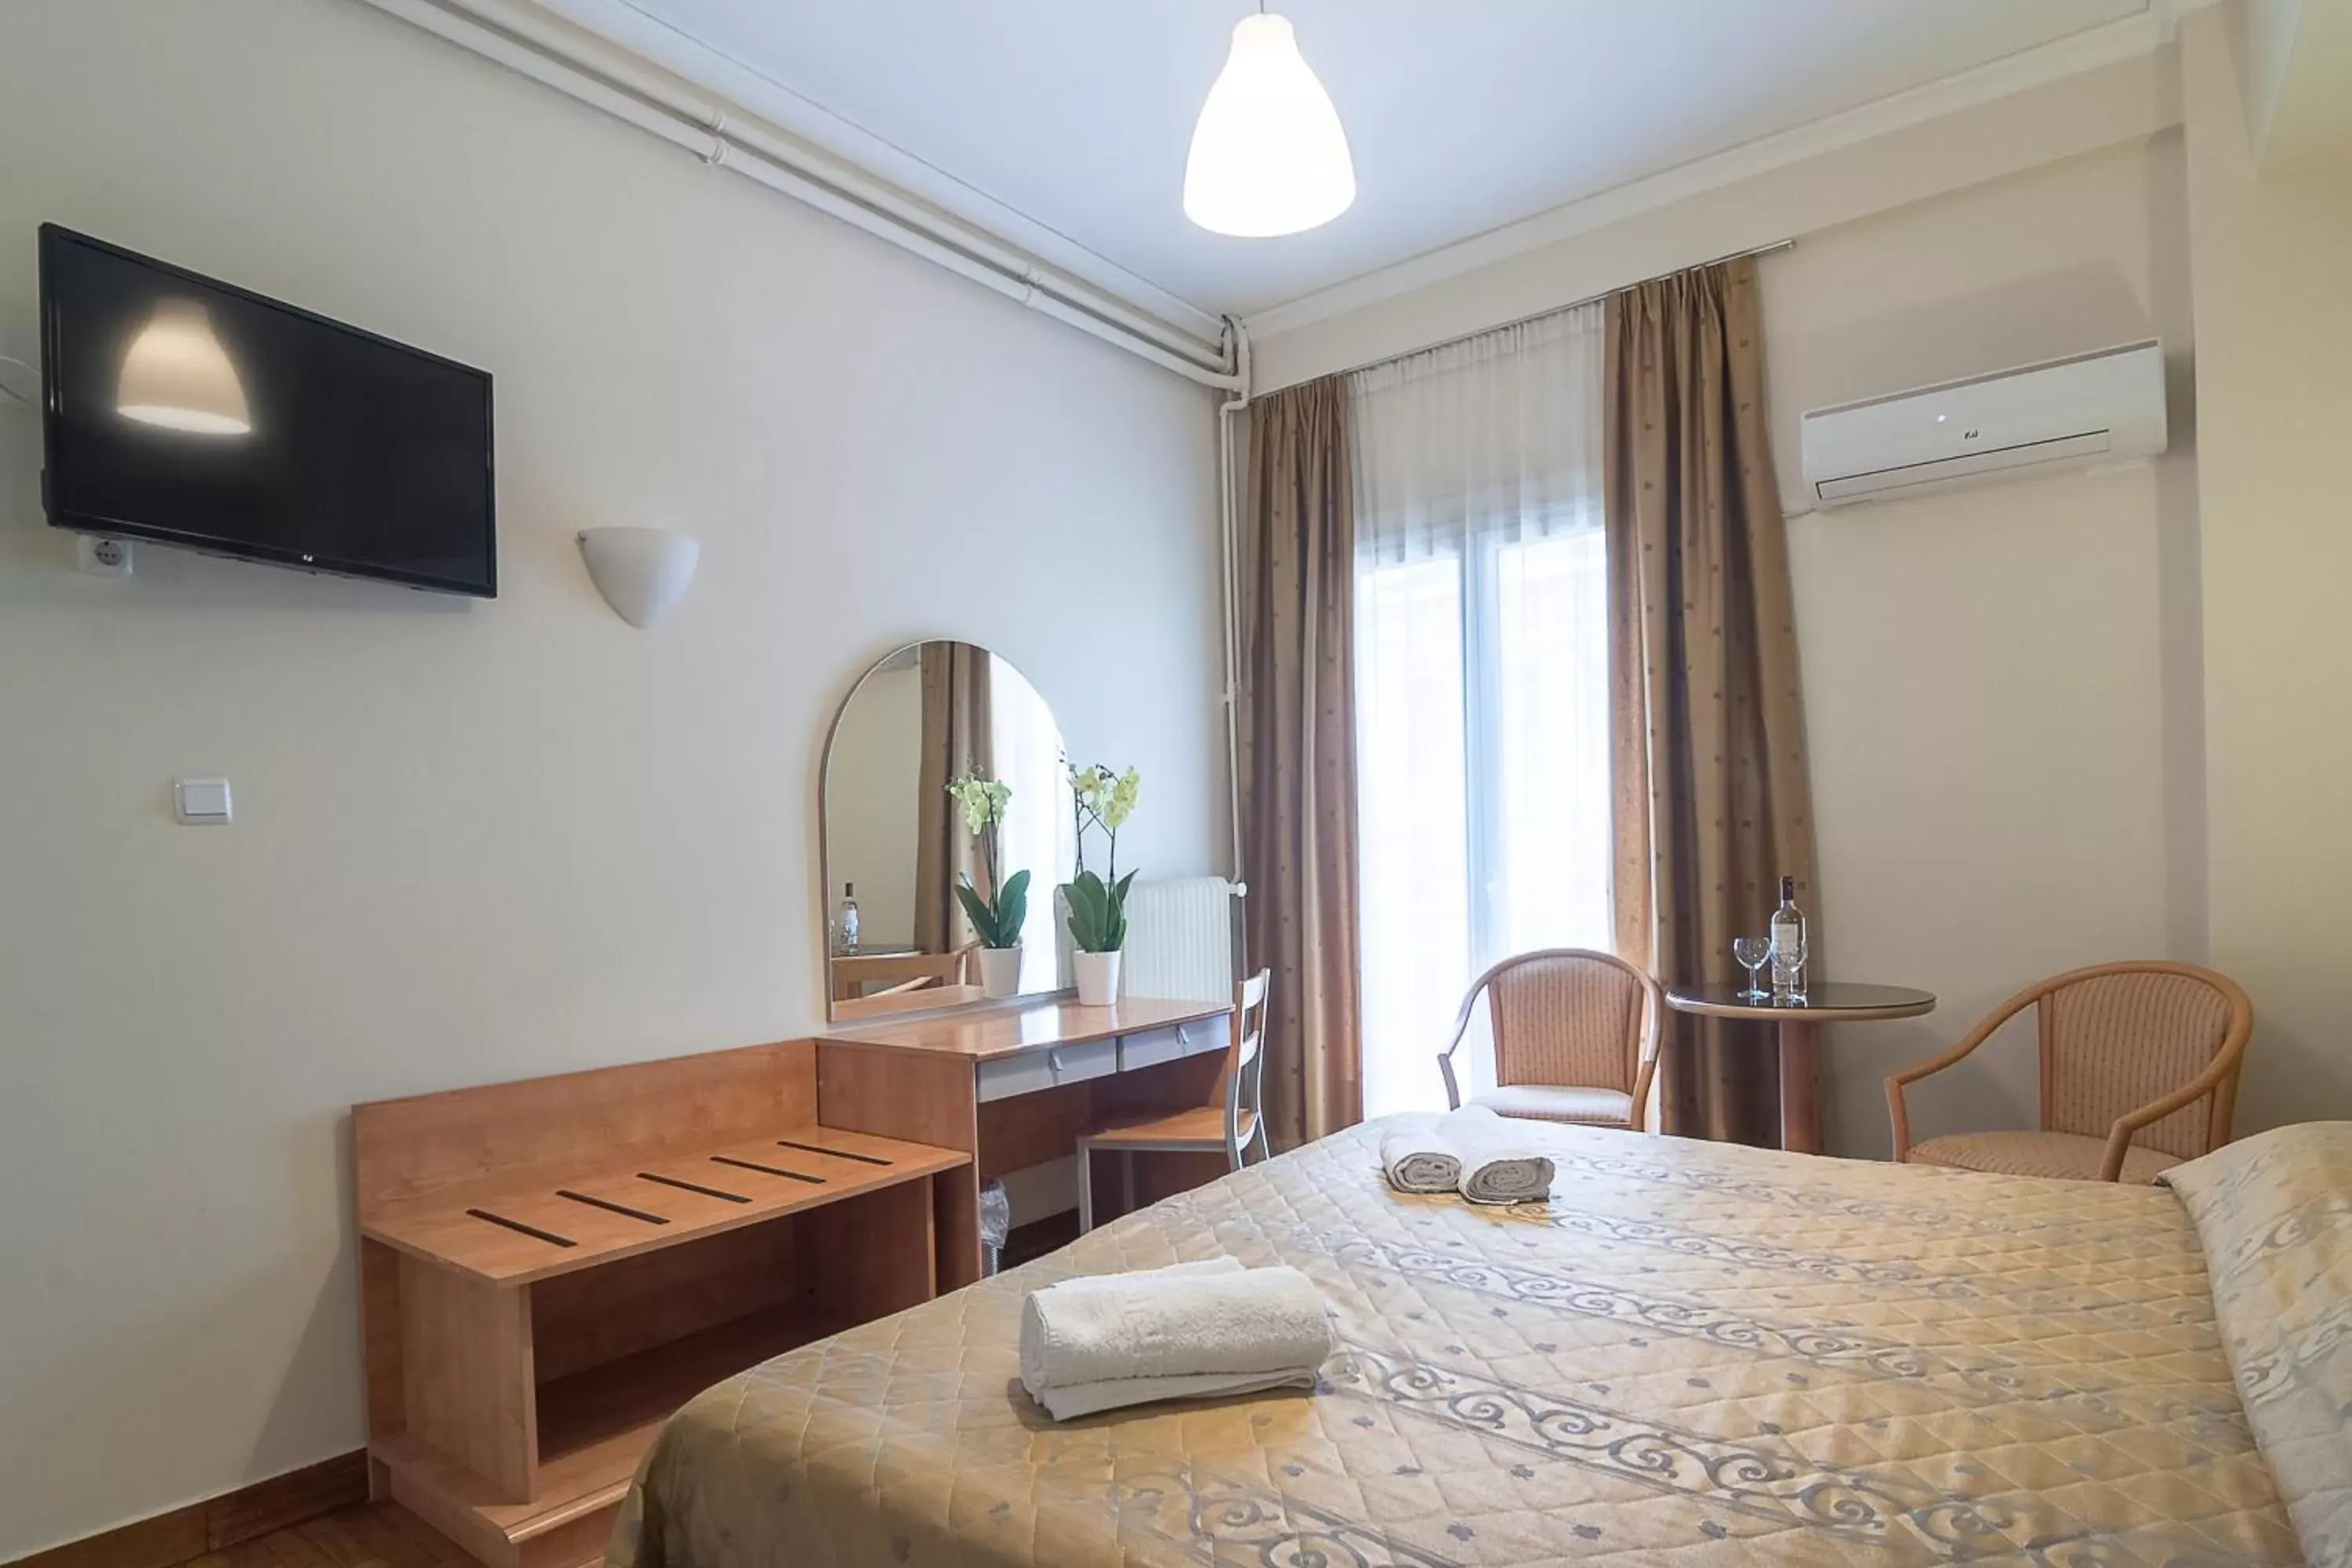 TV and multimedia, Room Photo in Ares Athens Hotel